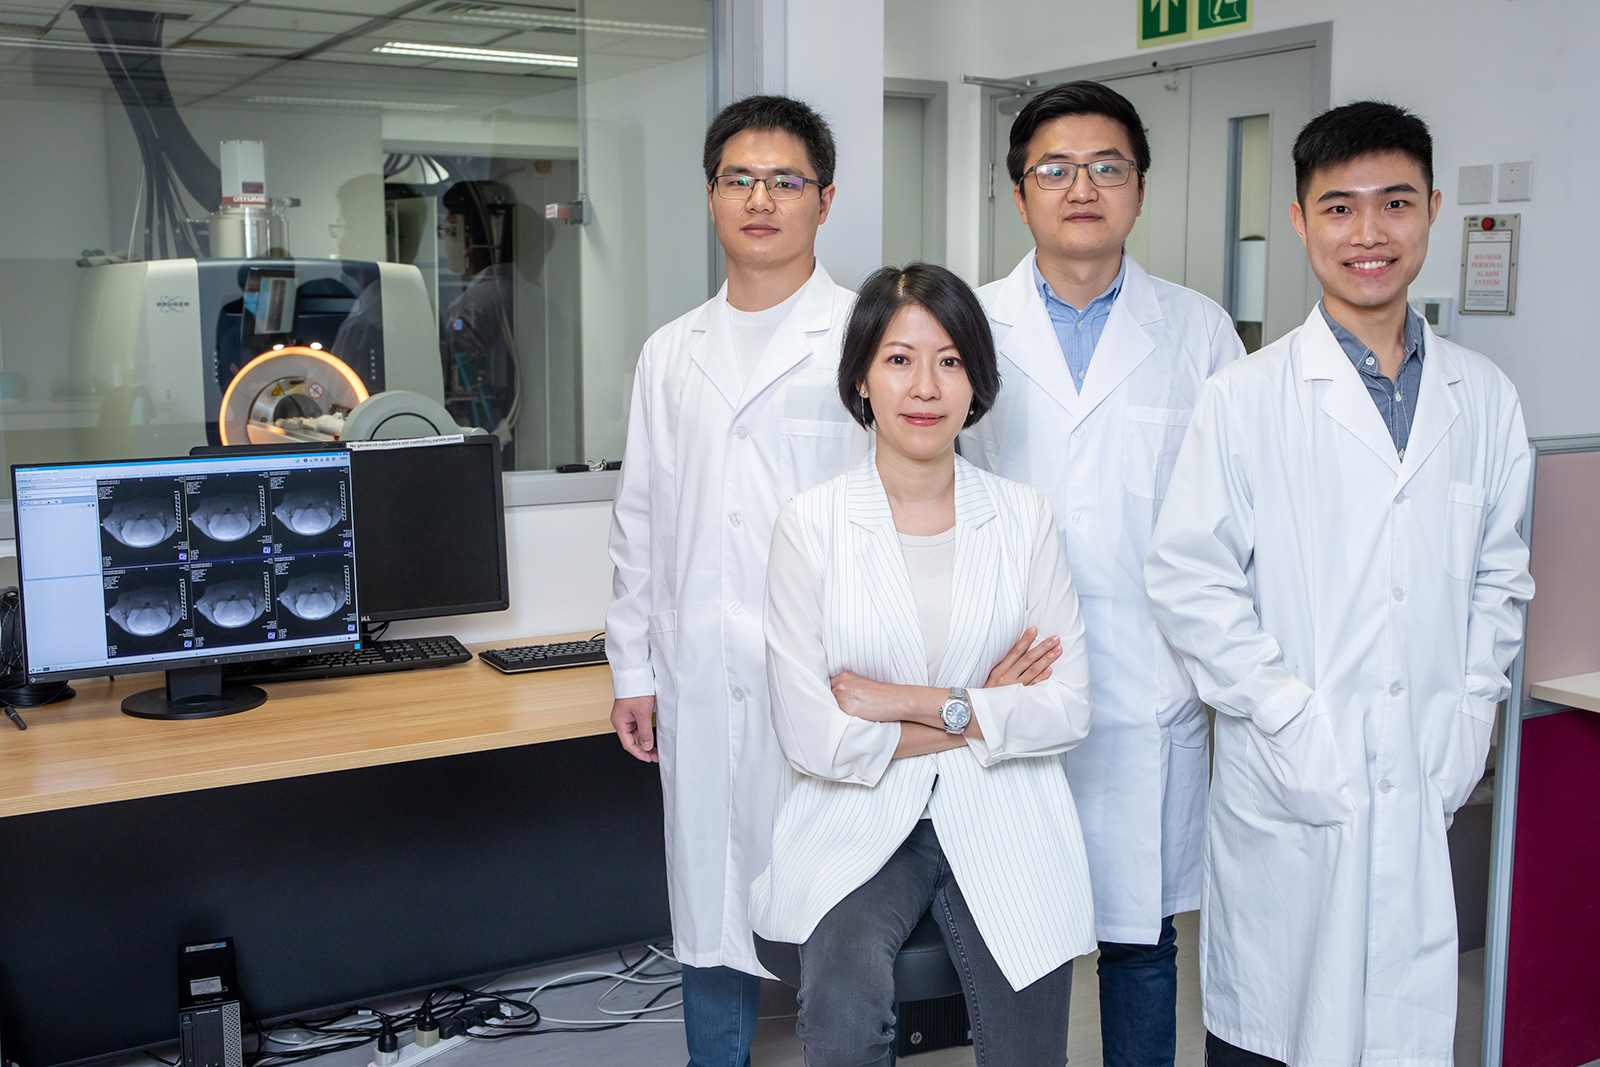 Dr Kannie Chan (front) and her team (back row, from left) Han Xiongqi, Huang Jianpan and Joseph H. C. Lai are collaborating with other scientists to develop a new imaging approach based on CEST MRI for early detection of Alzheimer’s disease.